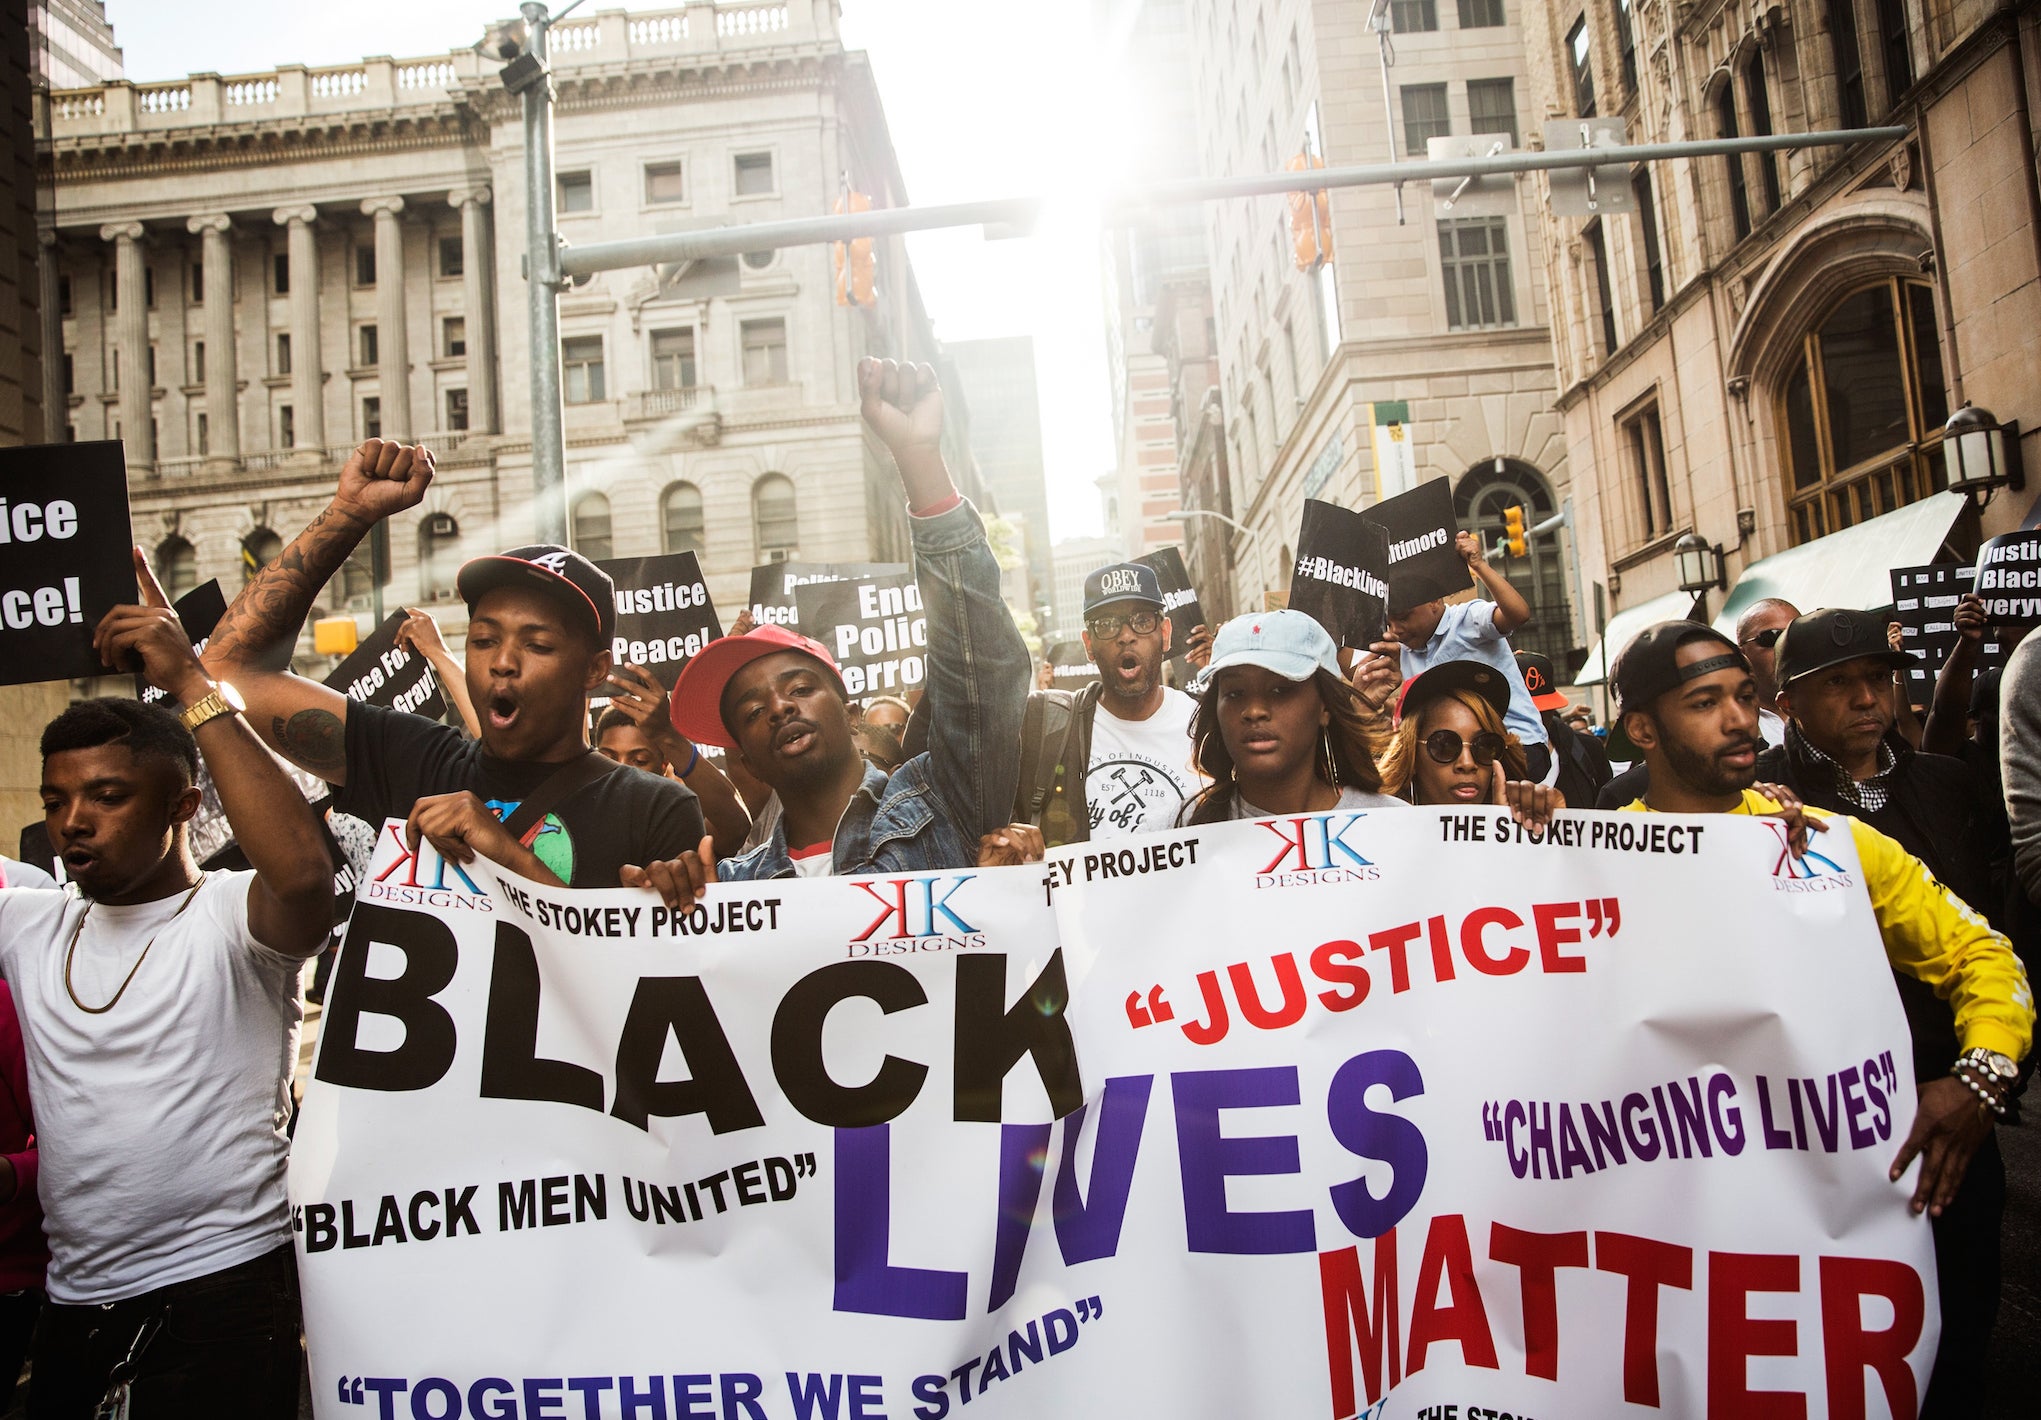 Protesters march in Baltimore demanding police accountability and racial equality following the death of Freddie Gray on 30 April 2015.